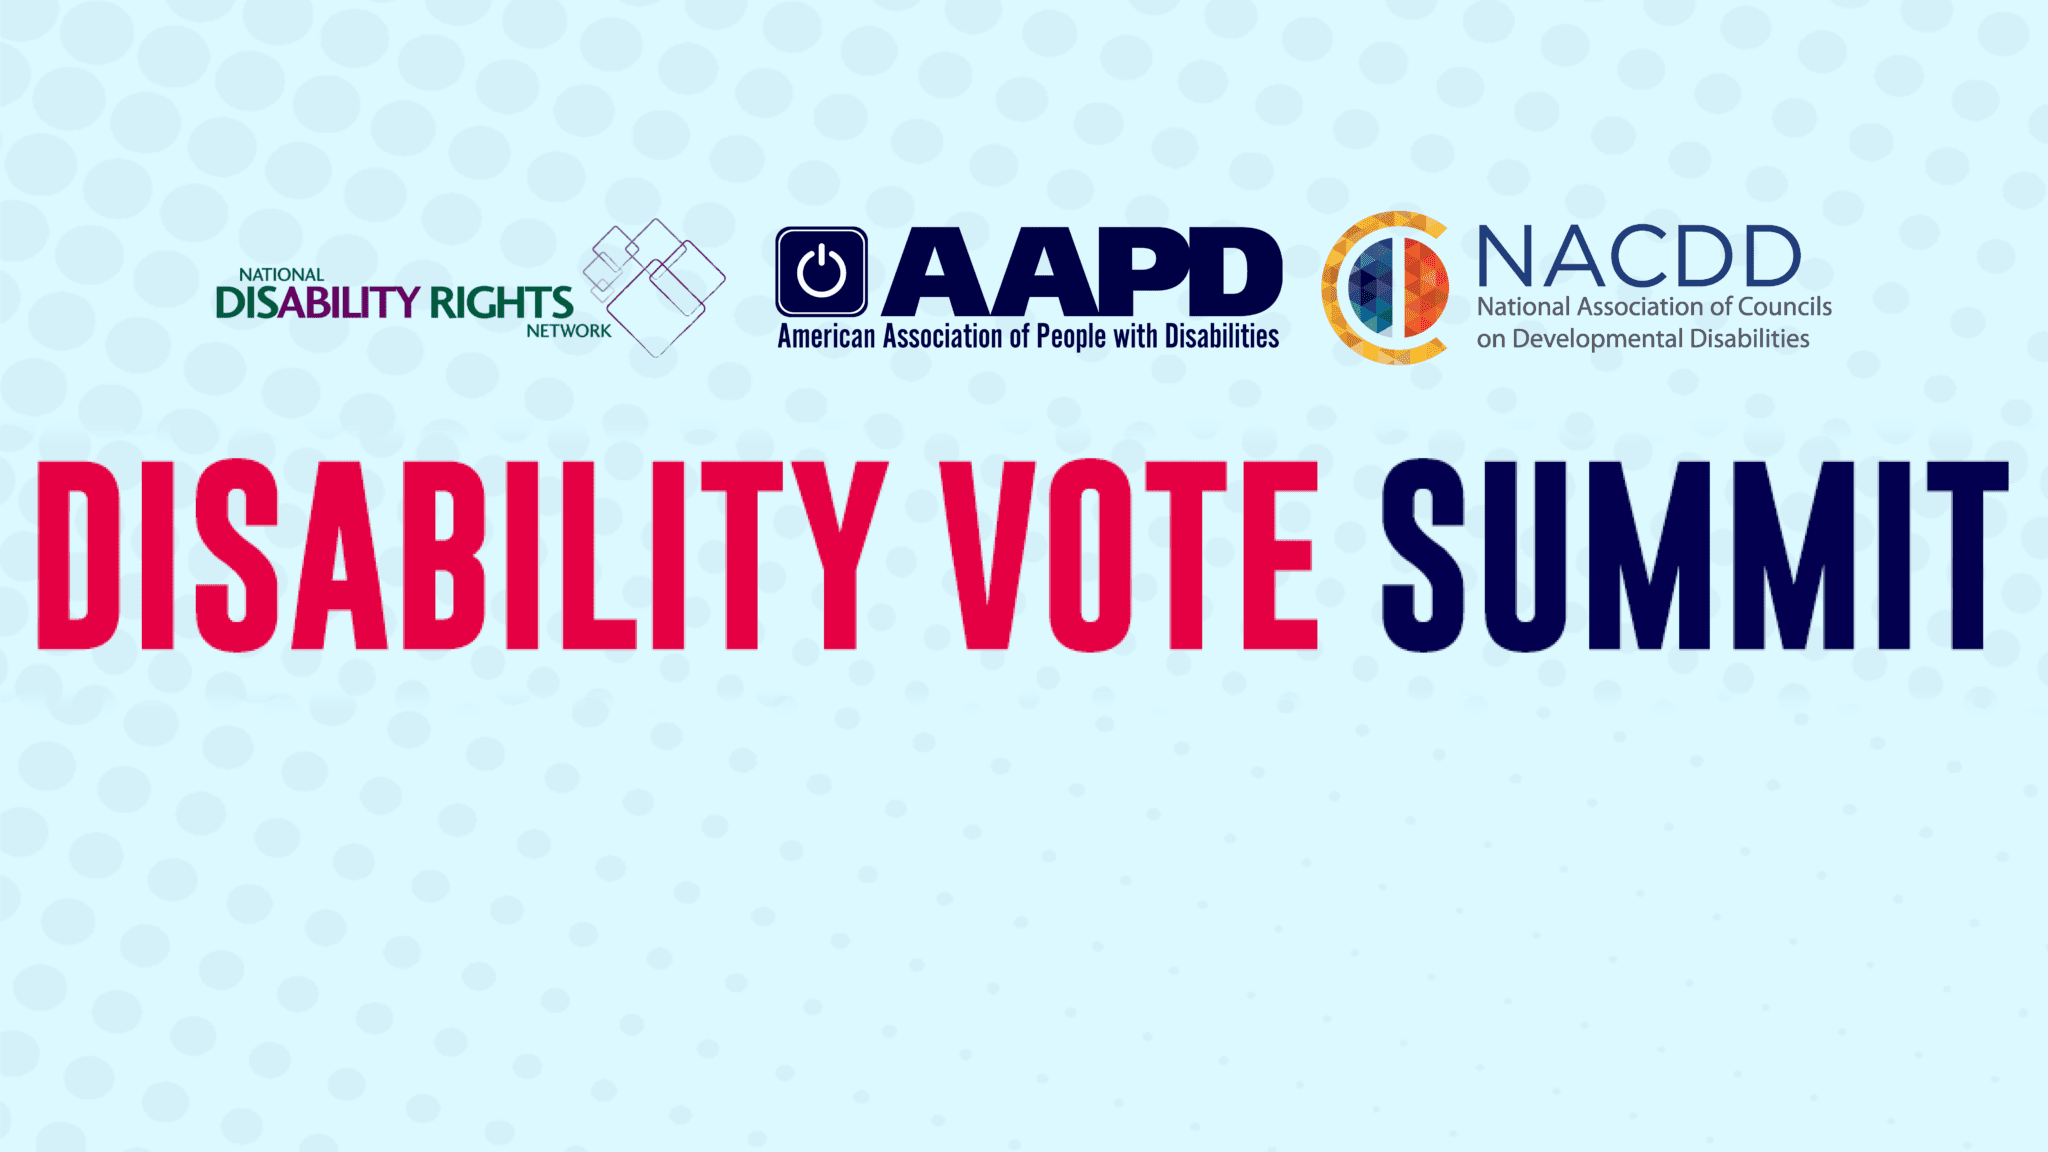 Disability Vote Summit with logos of AAPD, NDRN and NACDD